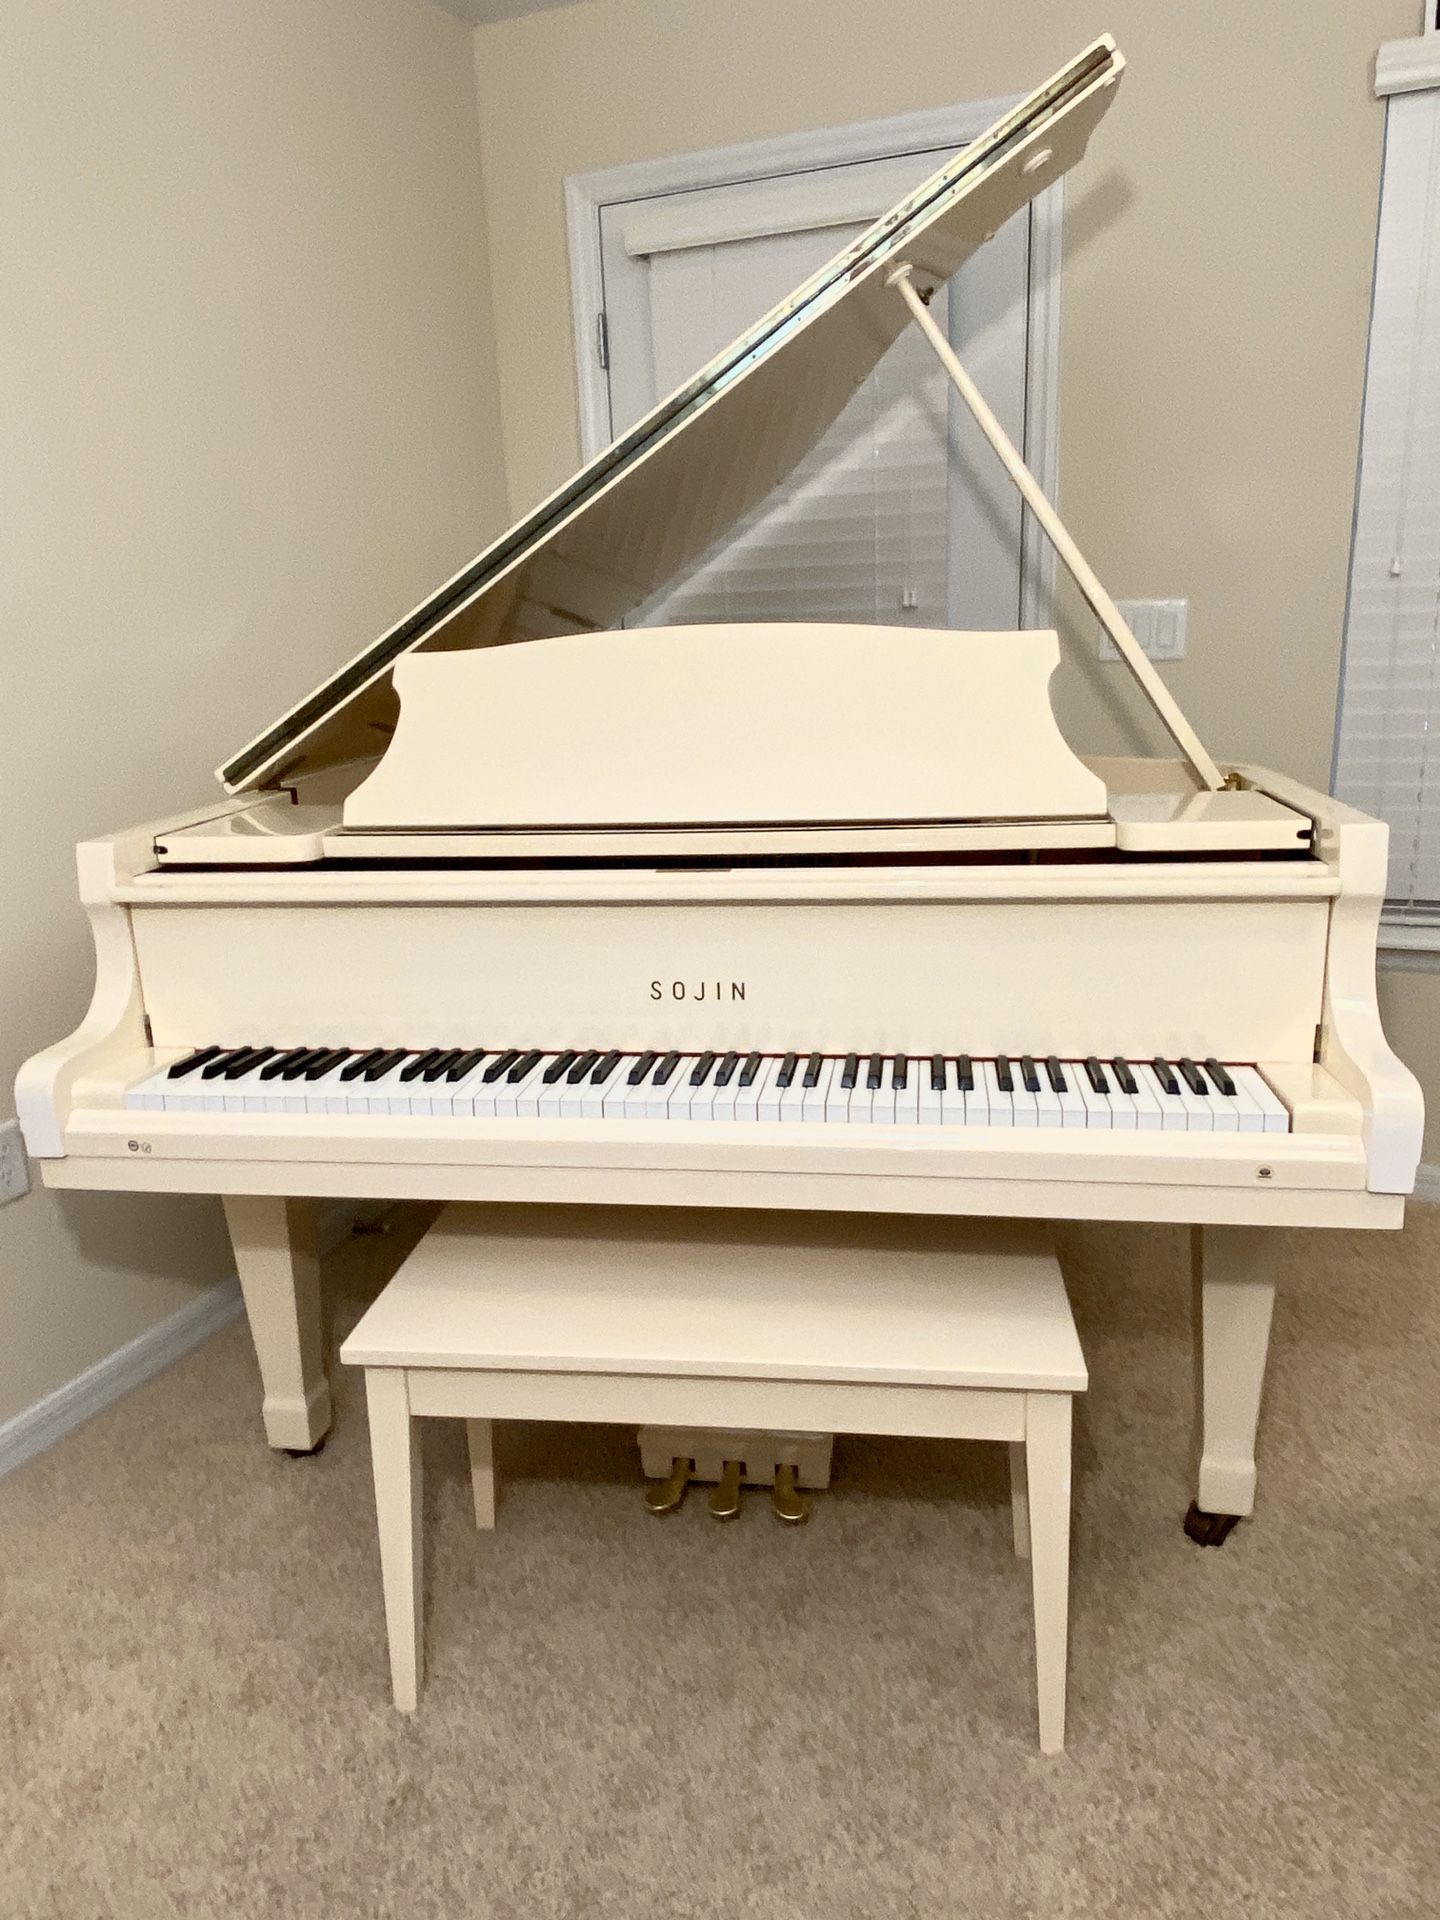 Beautiful Sojin Baby Grand Piano+delivery!